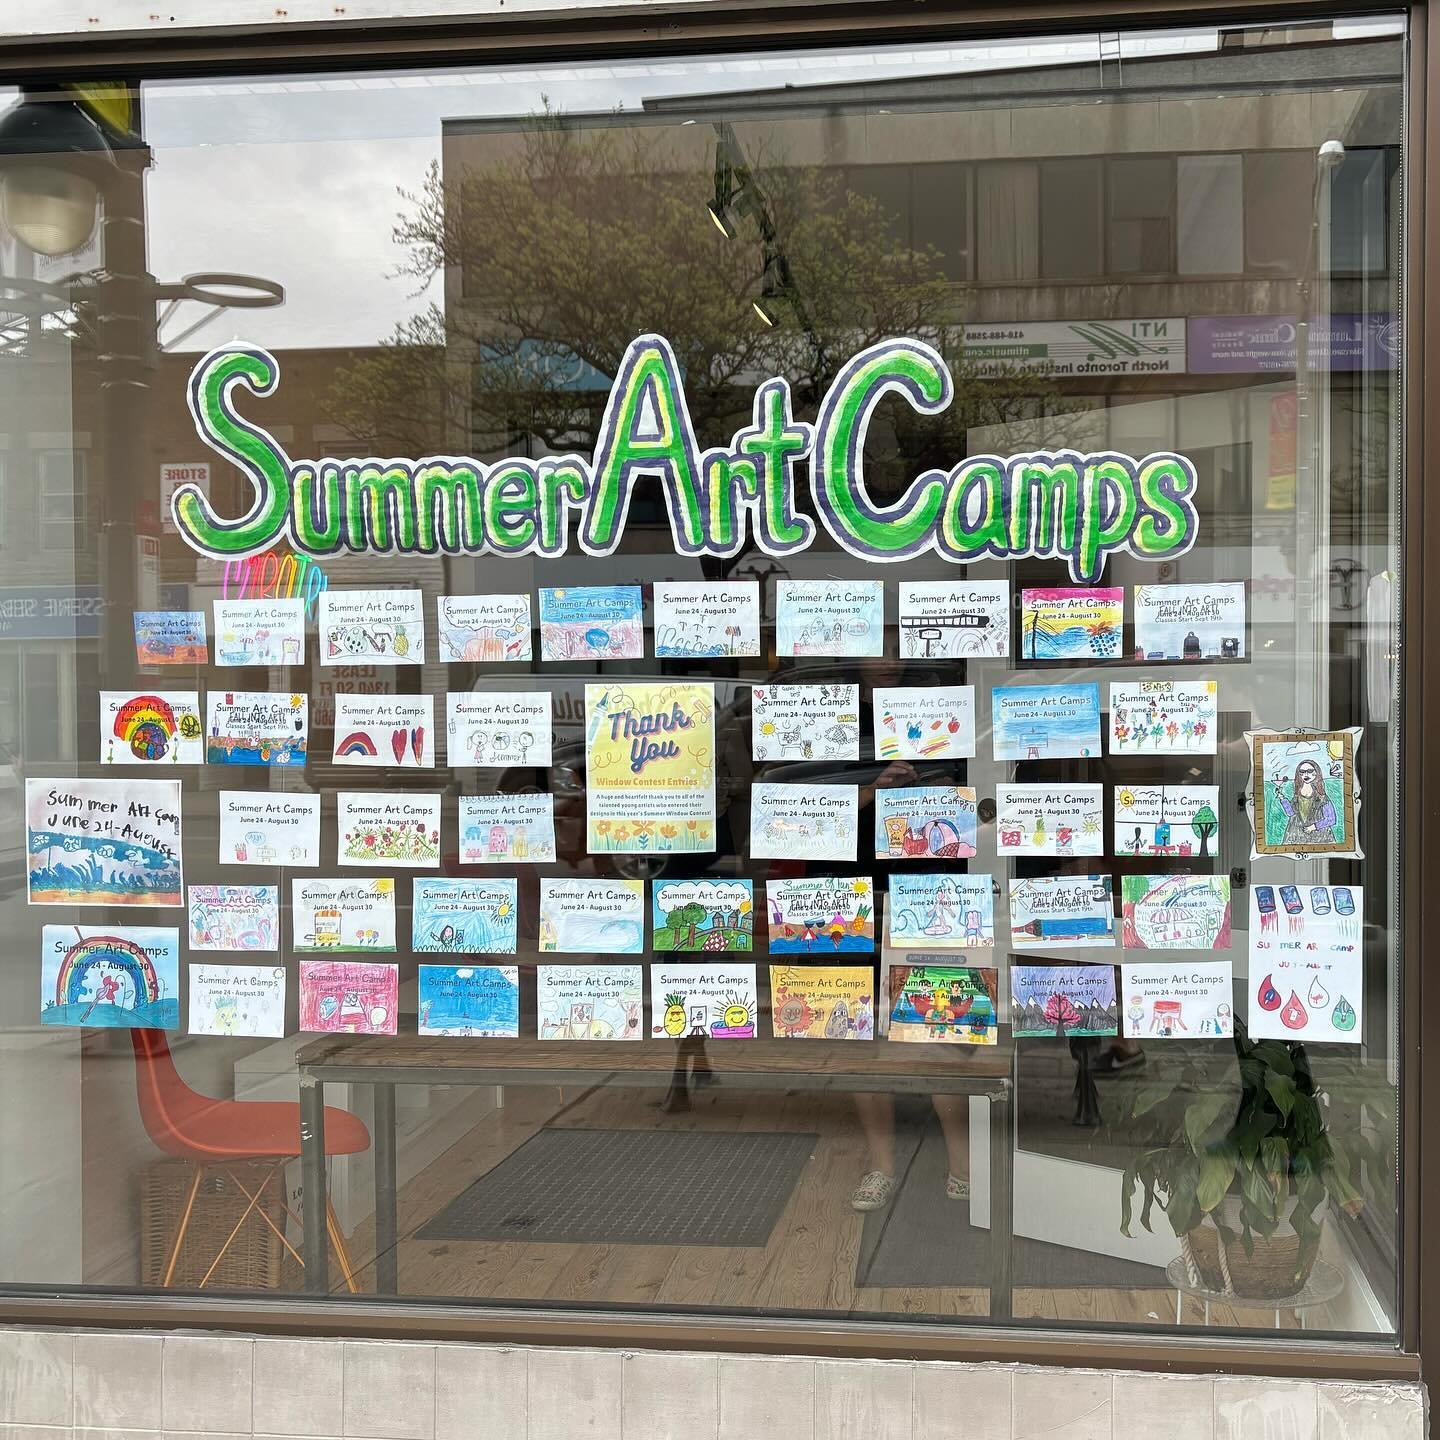 Thank you for all the wonderful entries to our Summer Window Contest! We have selected and contacted our winners. Swing by our location in the next few weeks to check out the winning entry by Zoe K. which will be recreated on our entire window! 

#to